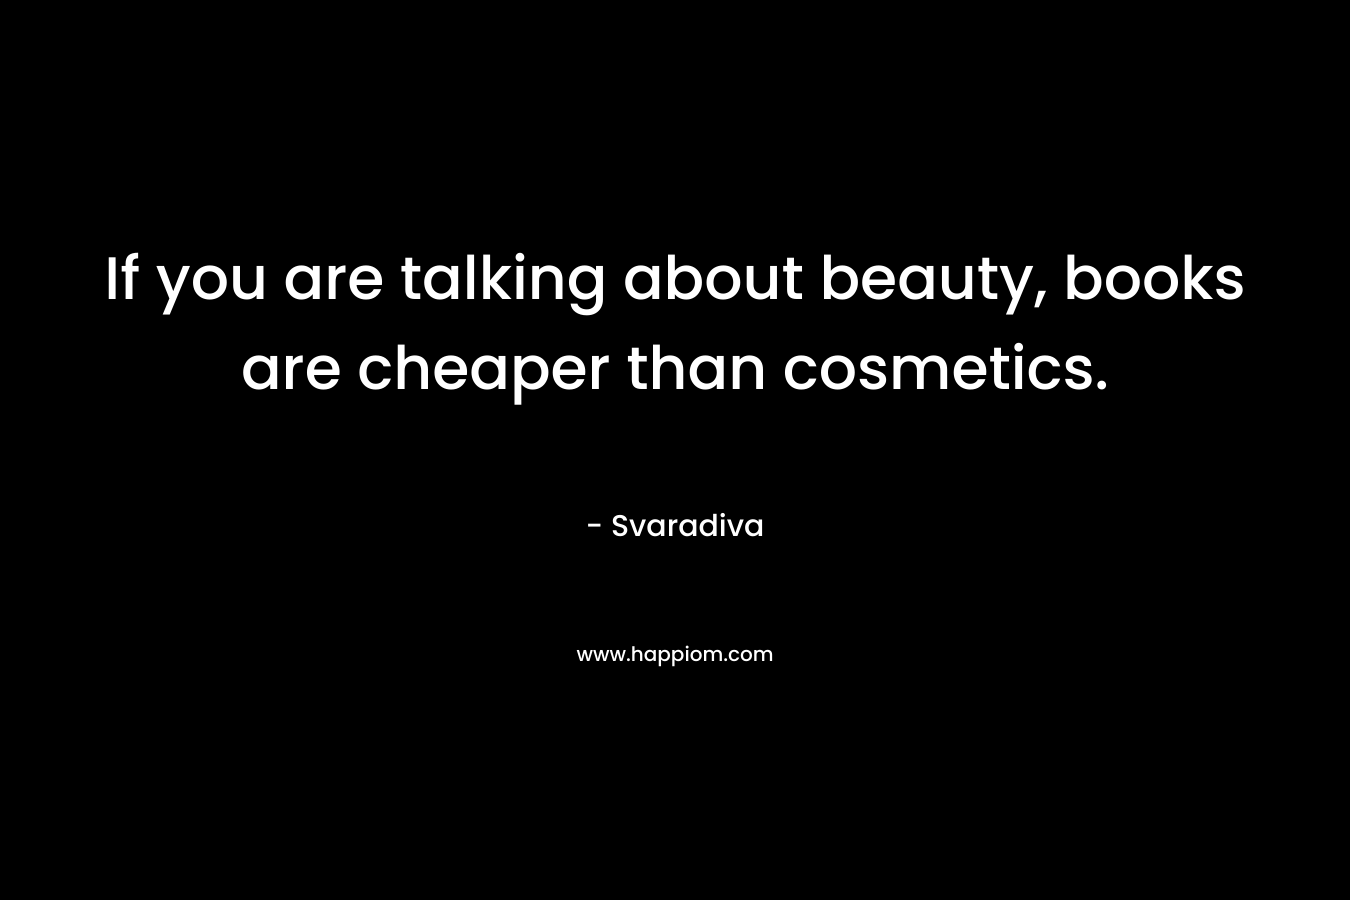 If you are talking about beauty, books are cheaper than cosmetics. – Svaradiva